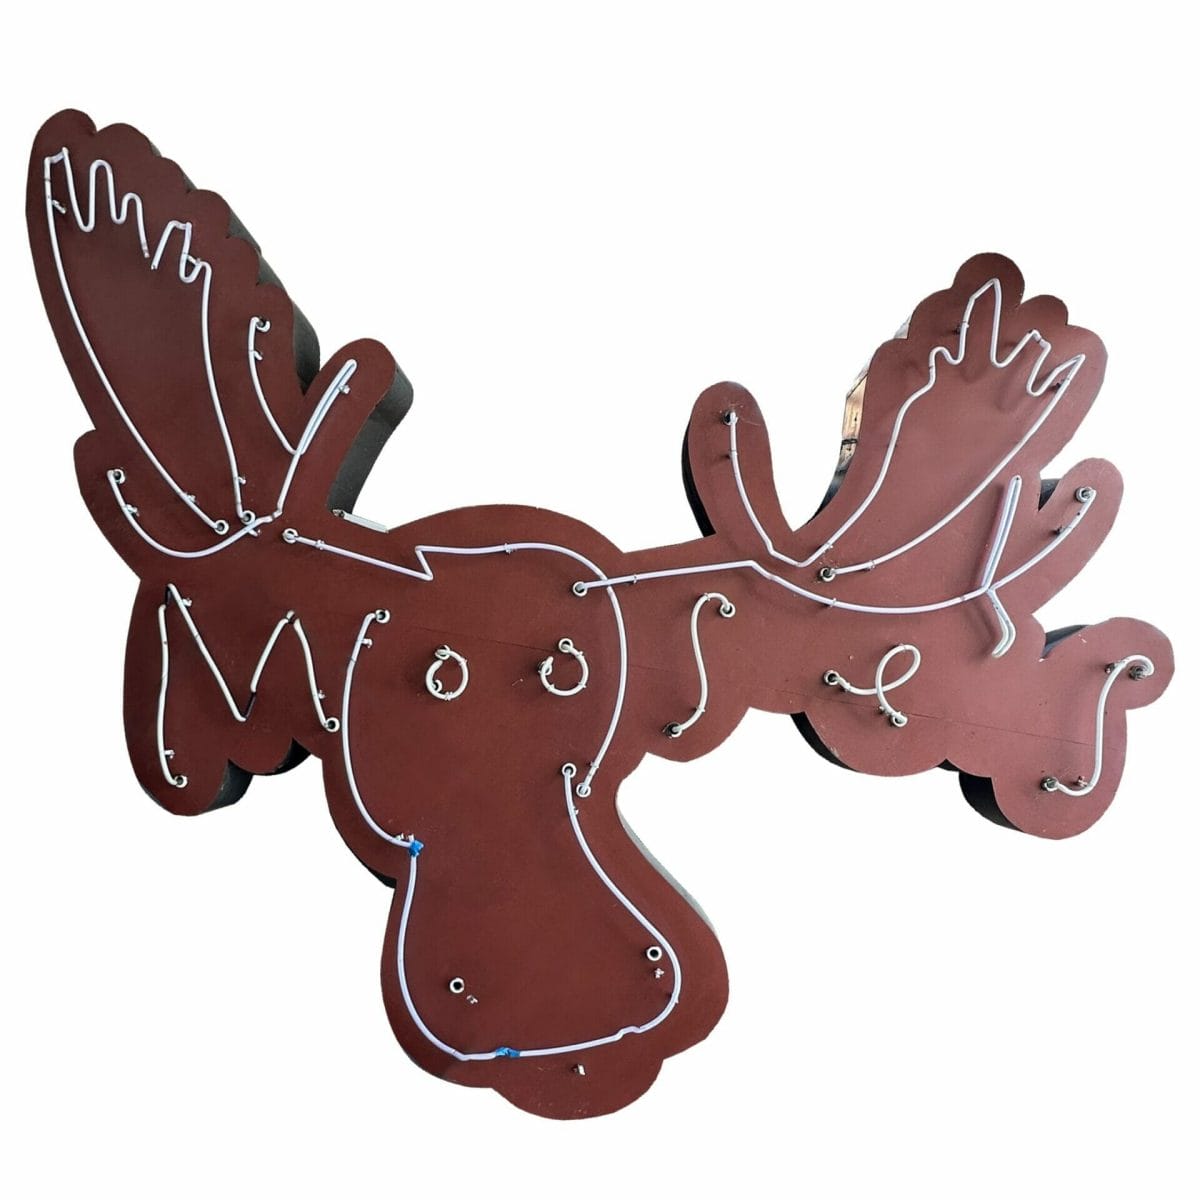 <span style="font-size: 20px;"><strong><a href="https://auctions.finesf.com/online-auctions/fine-estate-inc/neon-sign-moose-4931694">Moose's Restaurant Sign</a></strong></span>